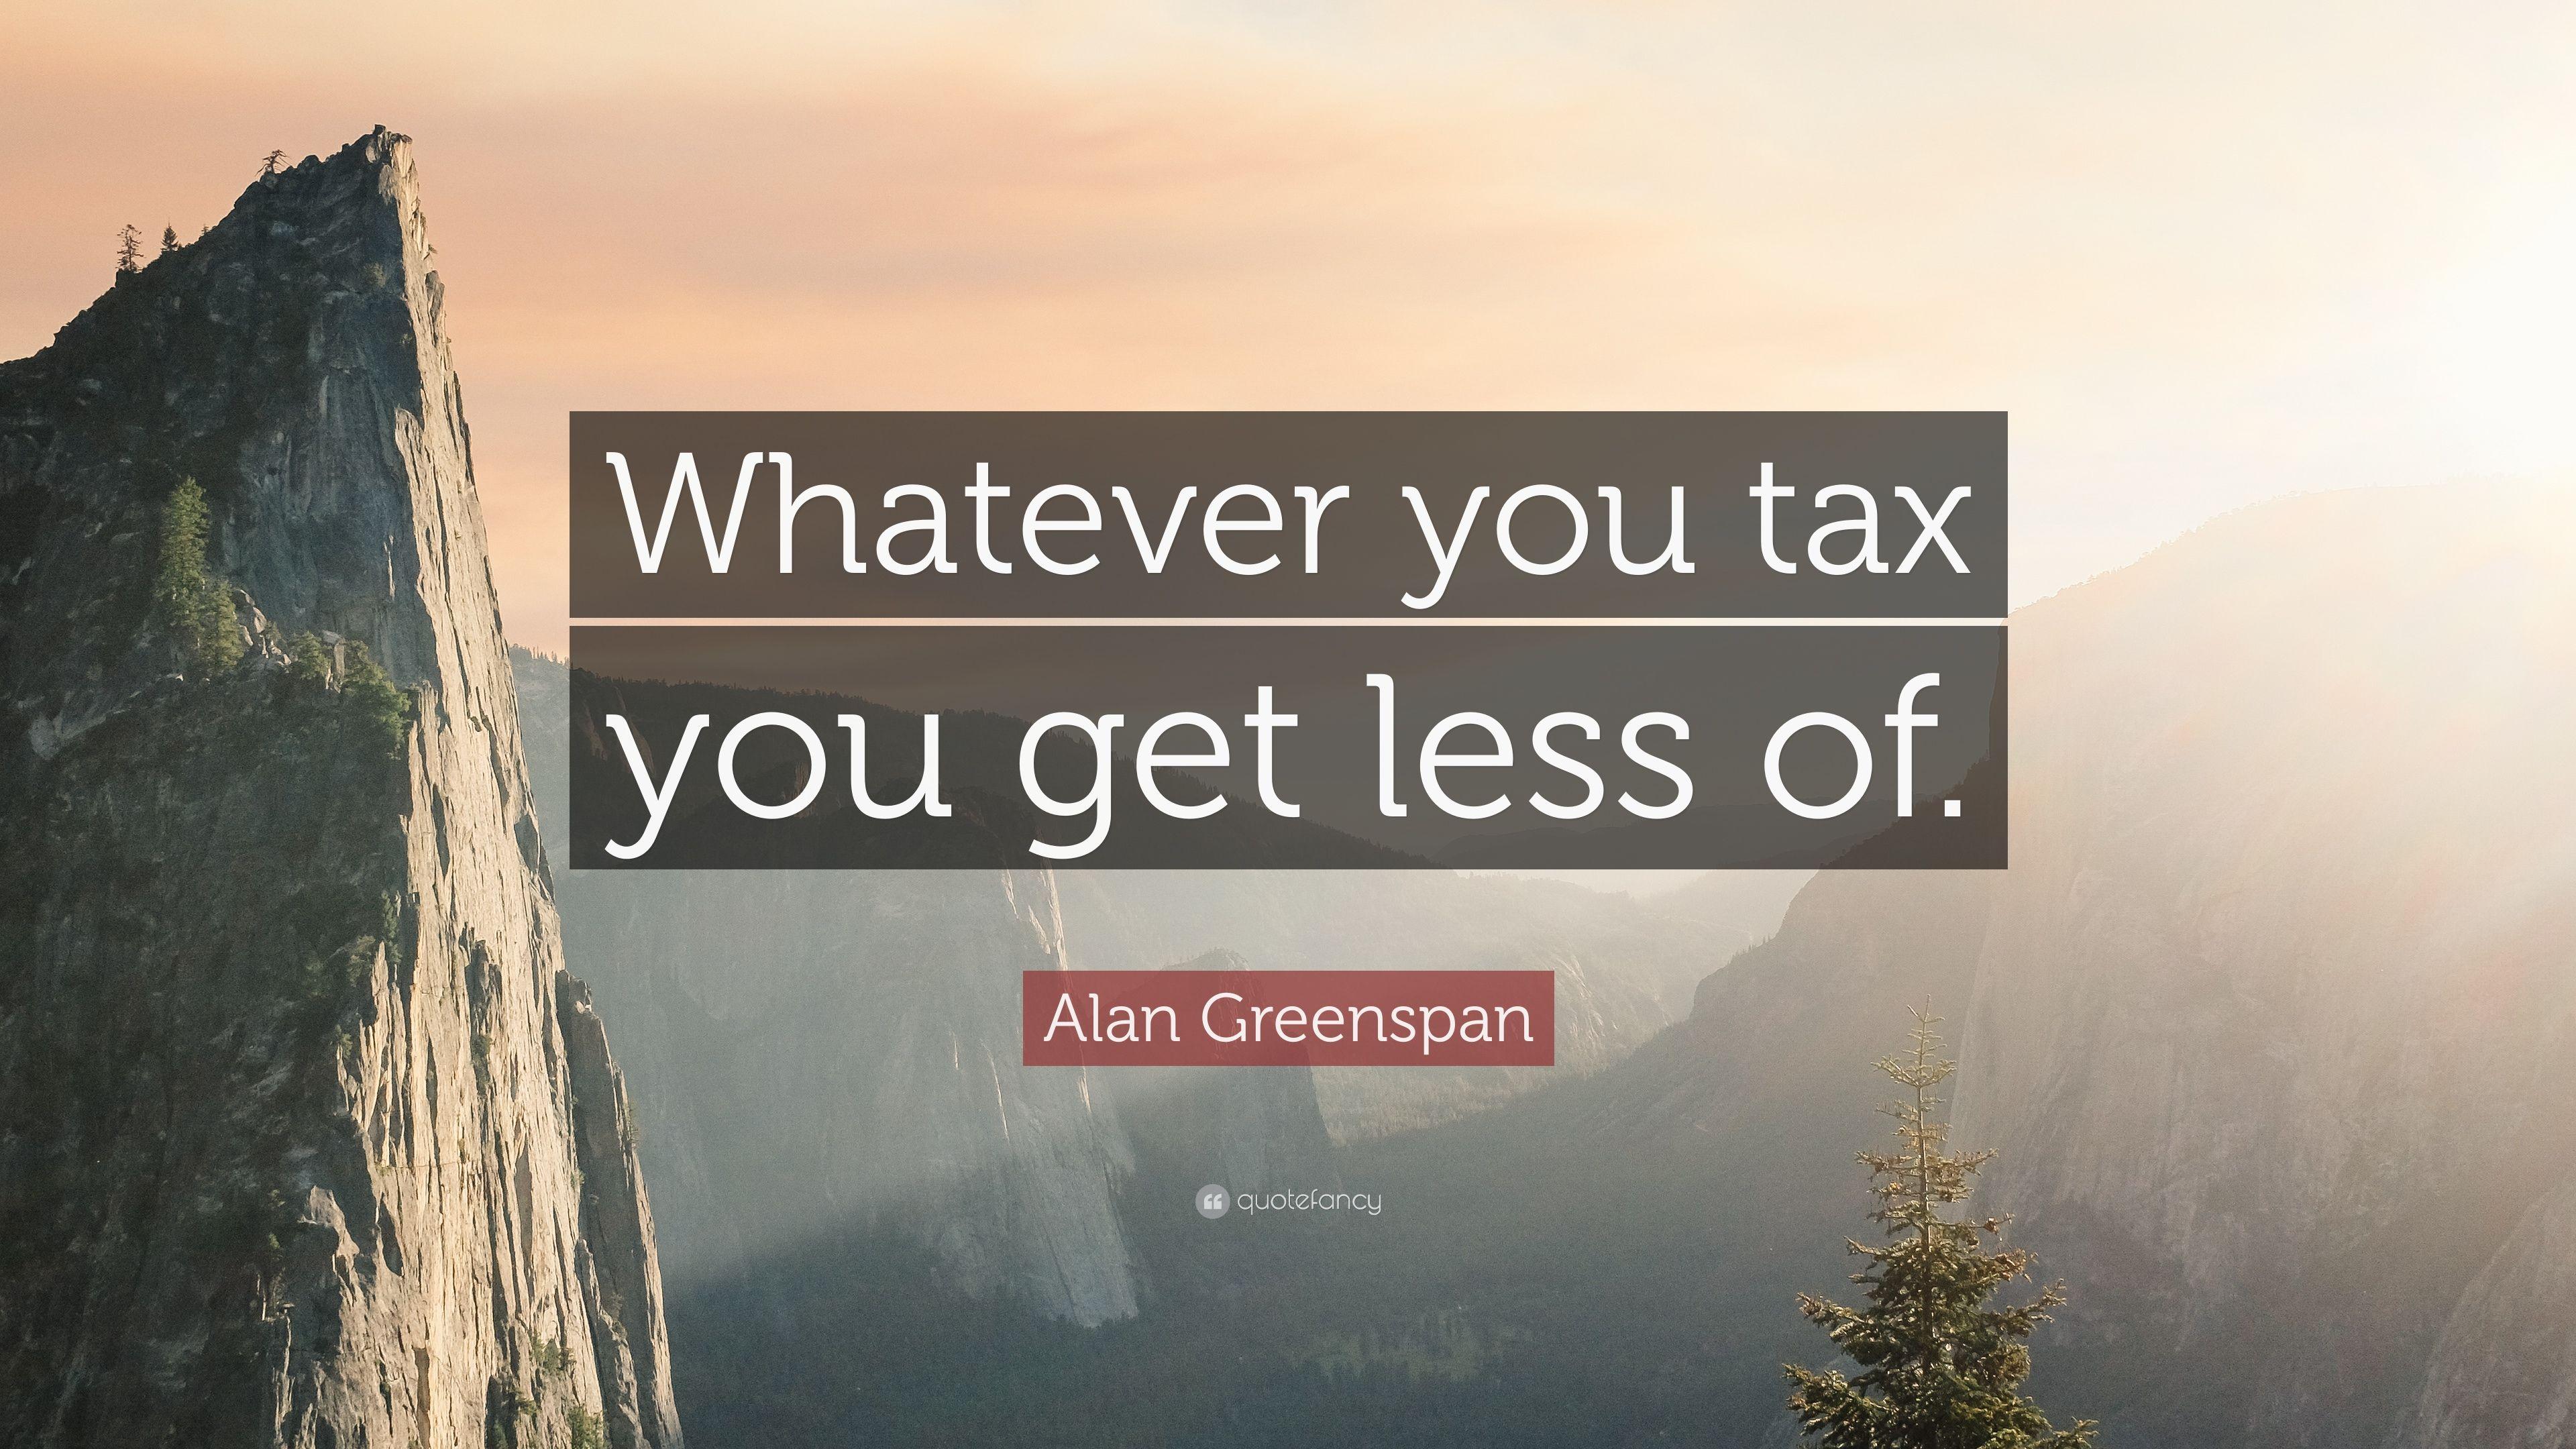 Alan Greenspan Quote: “Whatever you tax you get less of.” 7